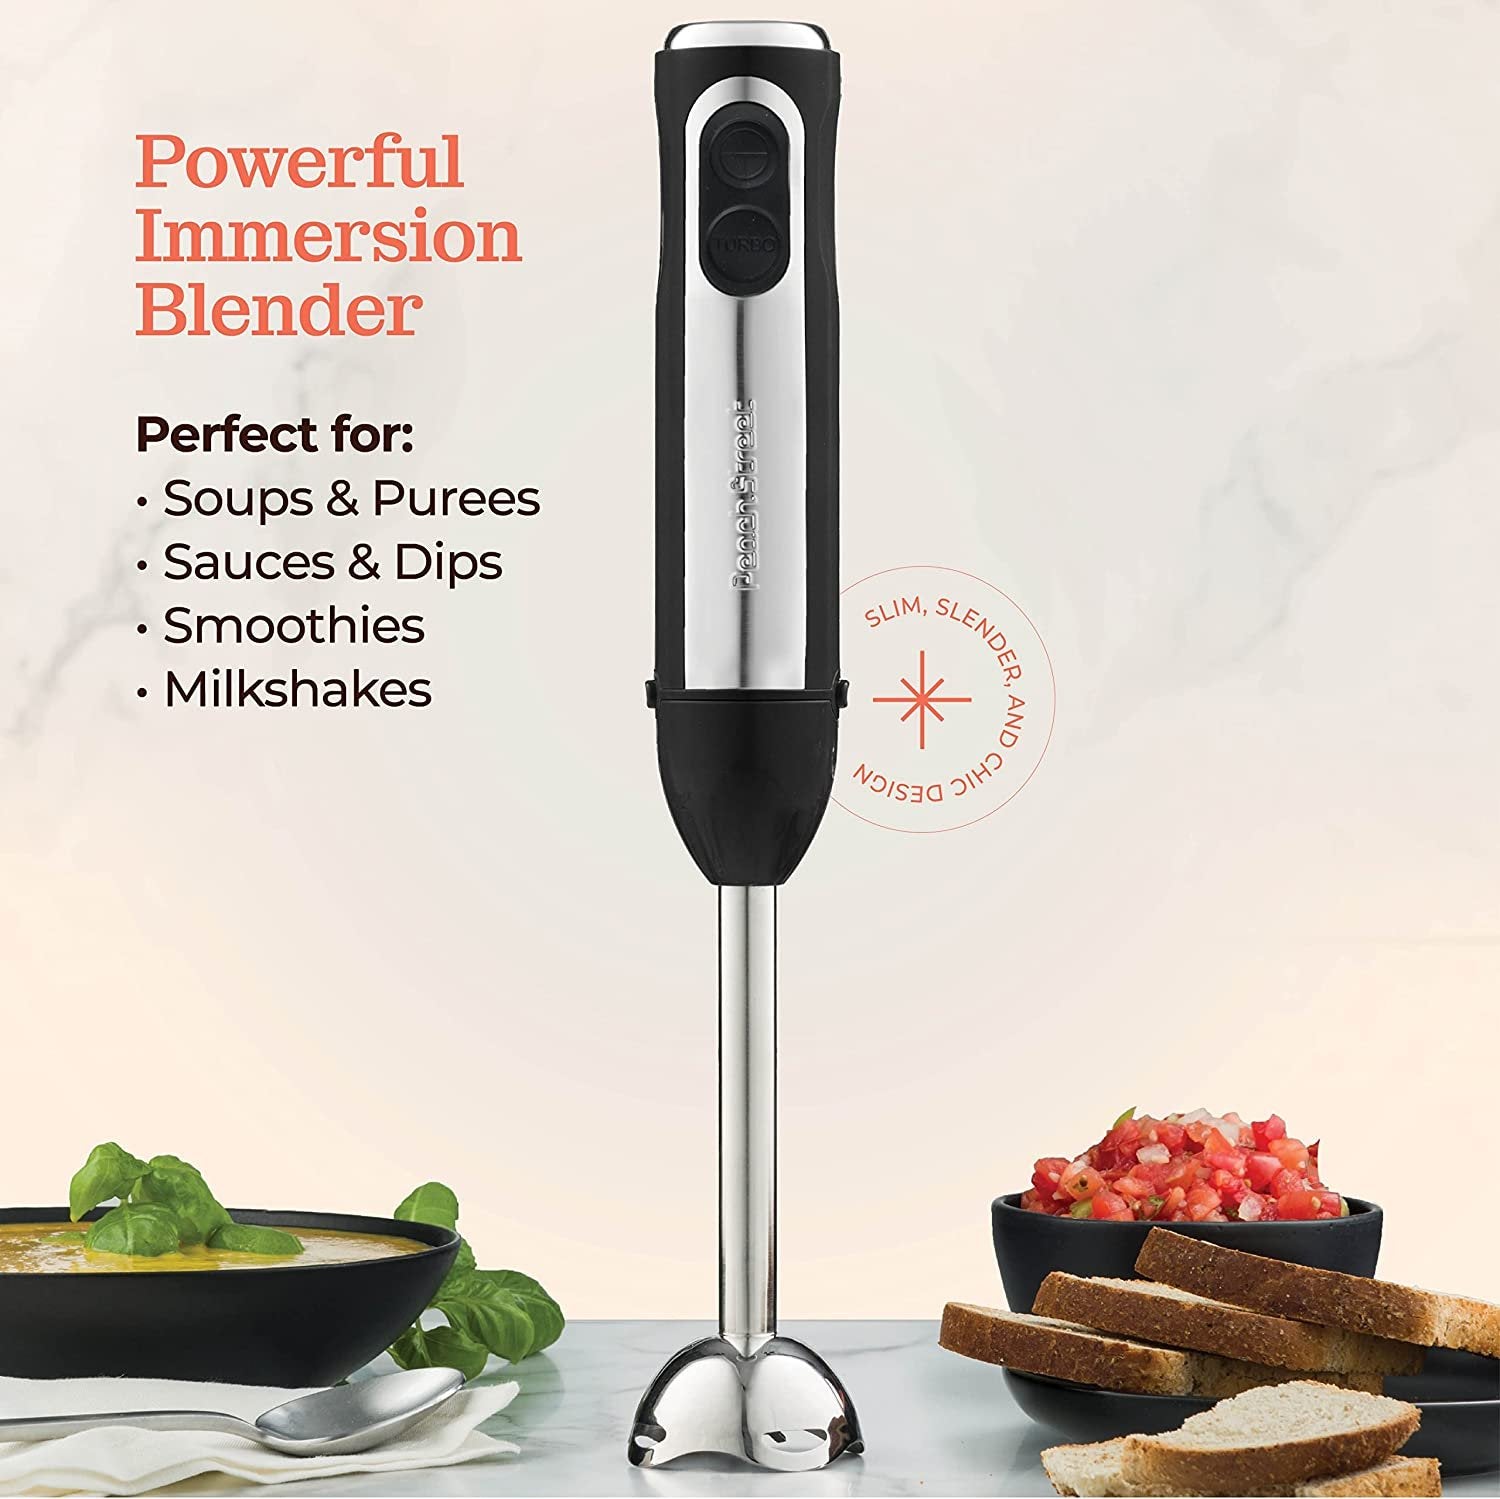 Powerful Immersion Blender, Electric Hand Blender 500 Watt with Turbo Mode, Detachable Base. Handheld Kitchen Blender Stick for Soup, Smoothie, Puree, Baby Food, 304 Stainless Steel Blades